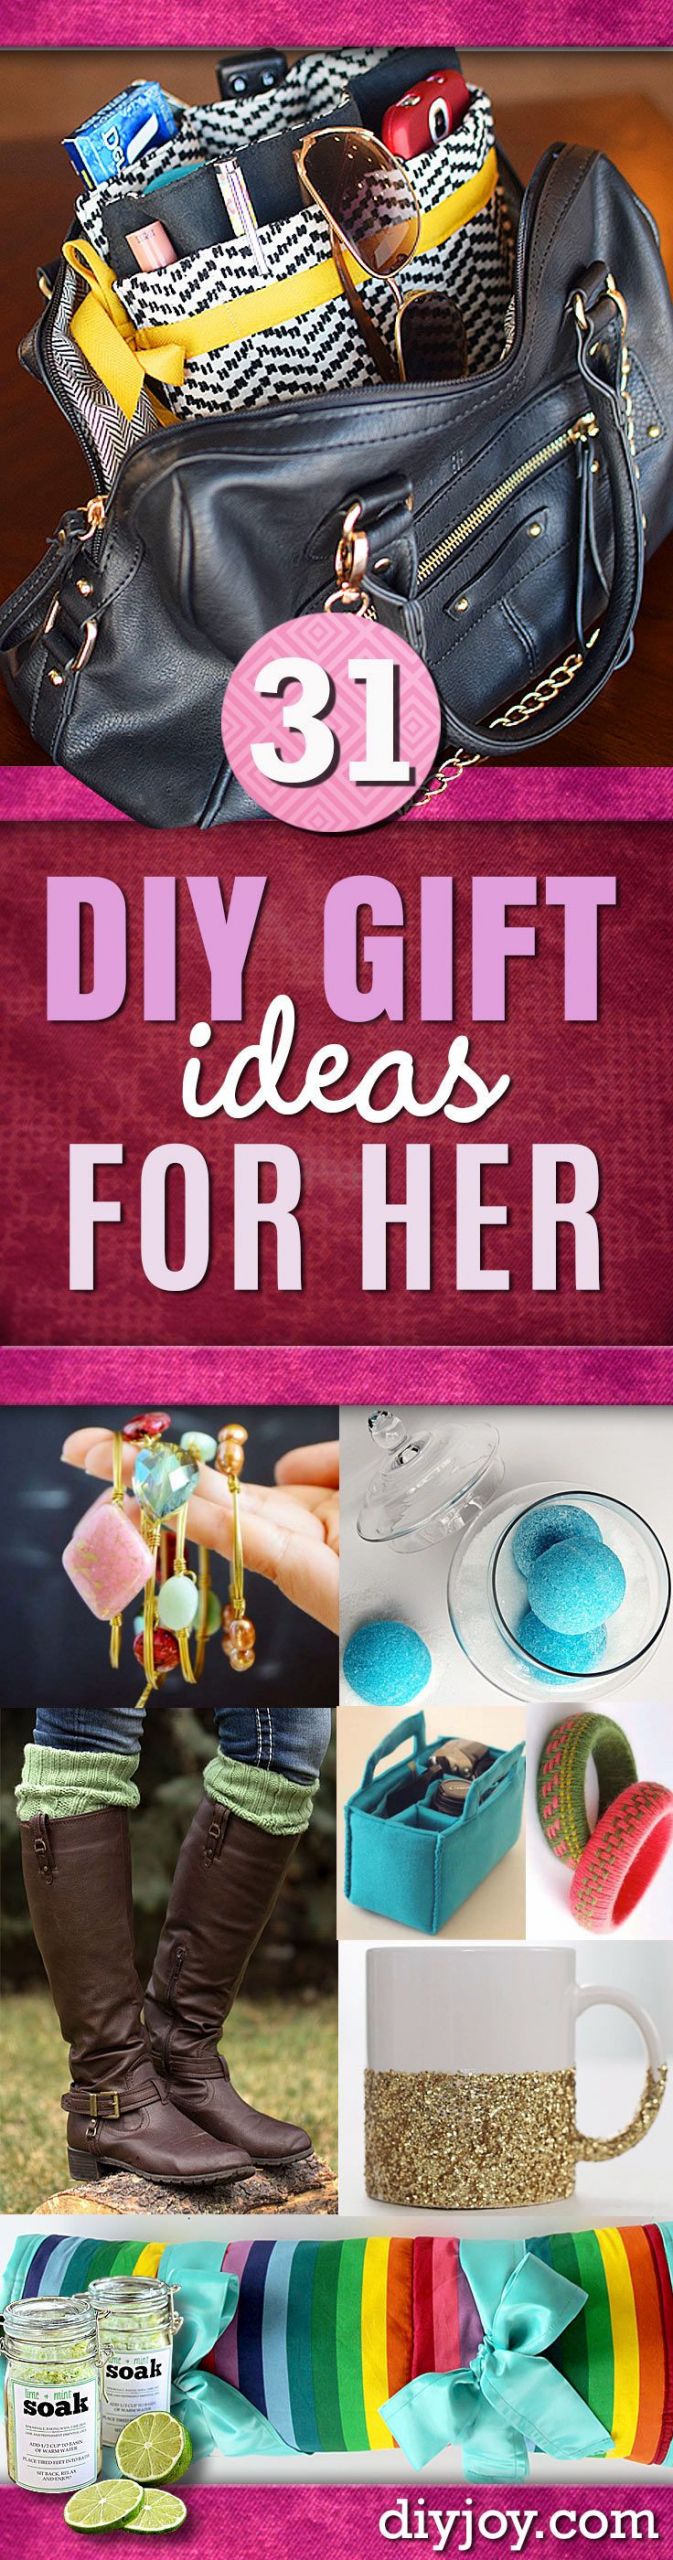 Christmas Gift Ideas For Girlfriends
 DIY Gift Ideas for Her